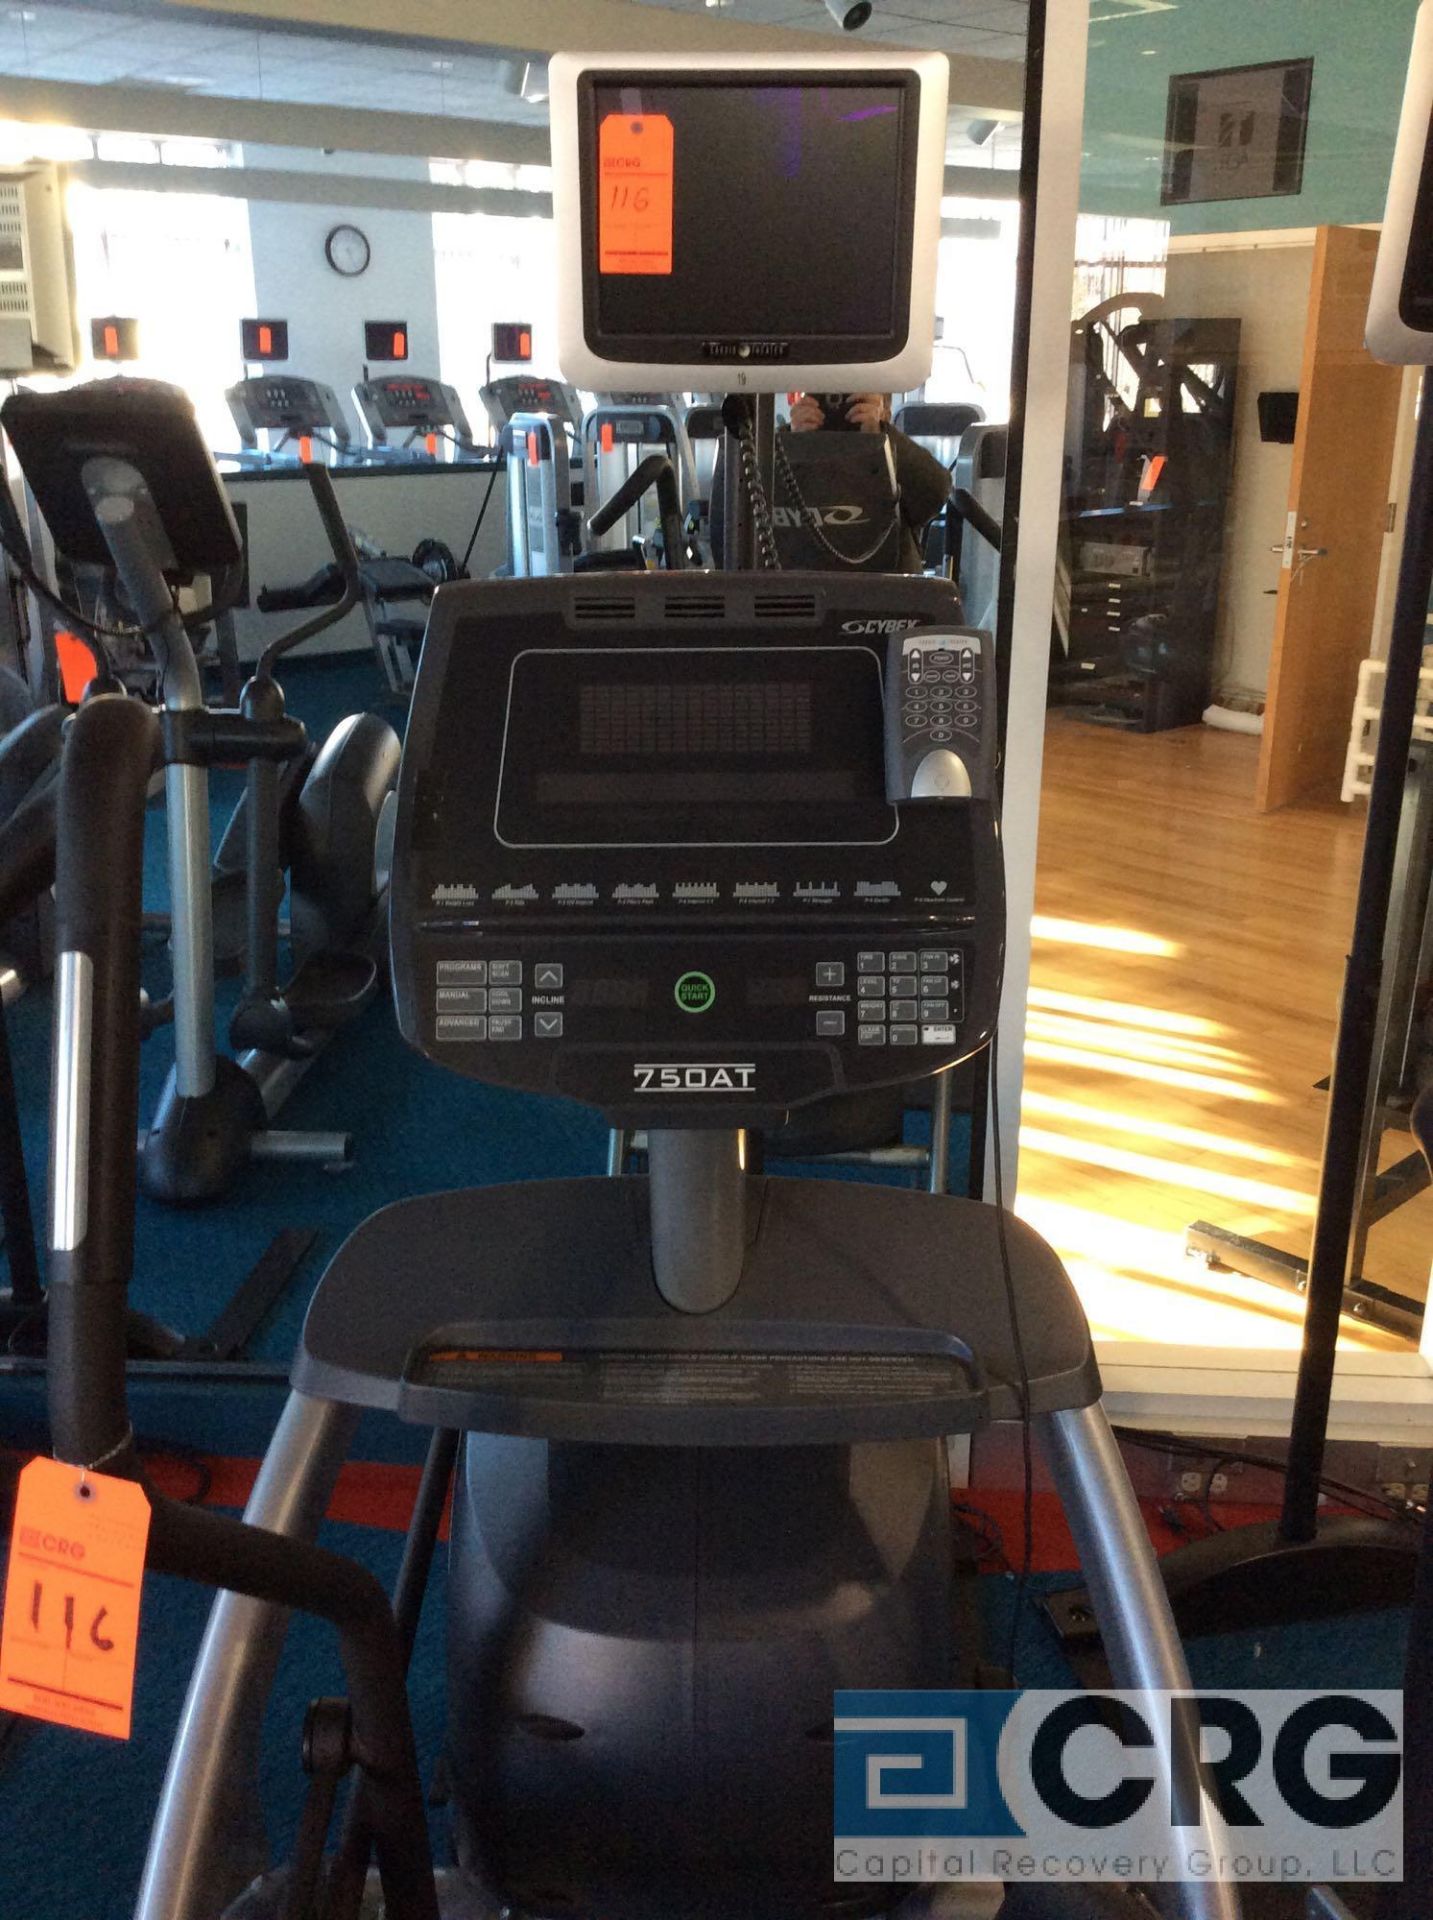 Cybex 750 AT Arc Trainer Machine with Cardio Theater monitor - Image 3 of 3